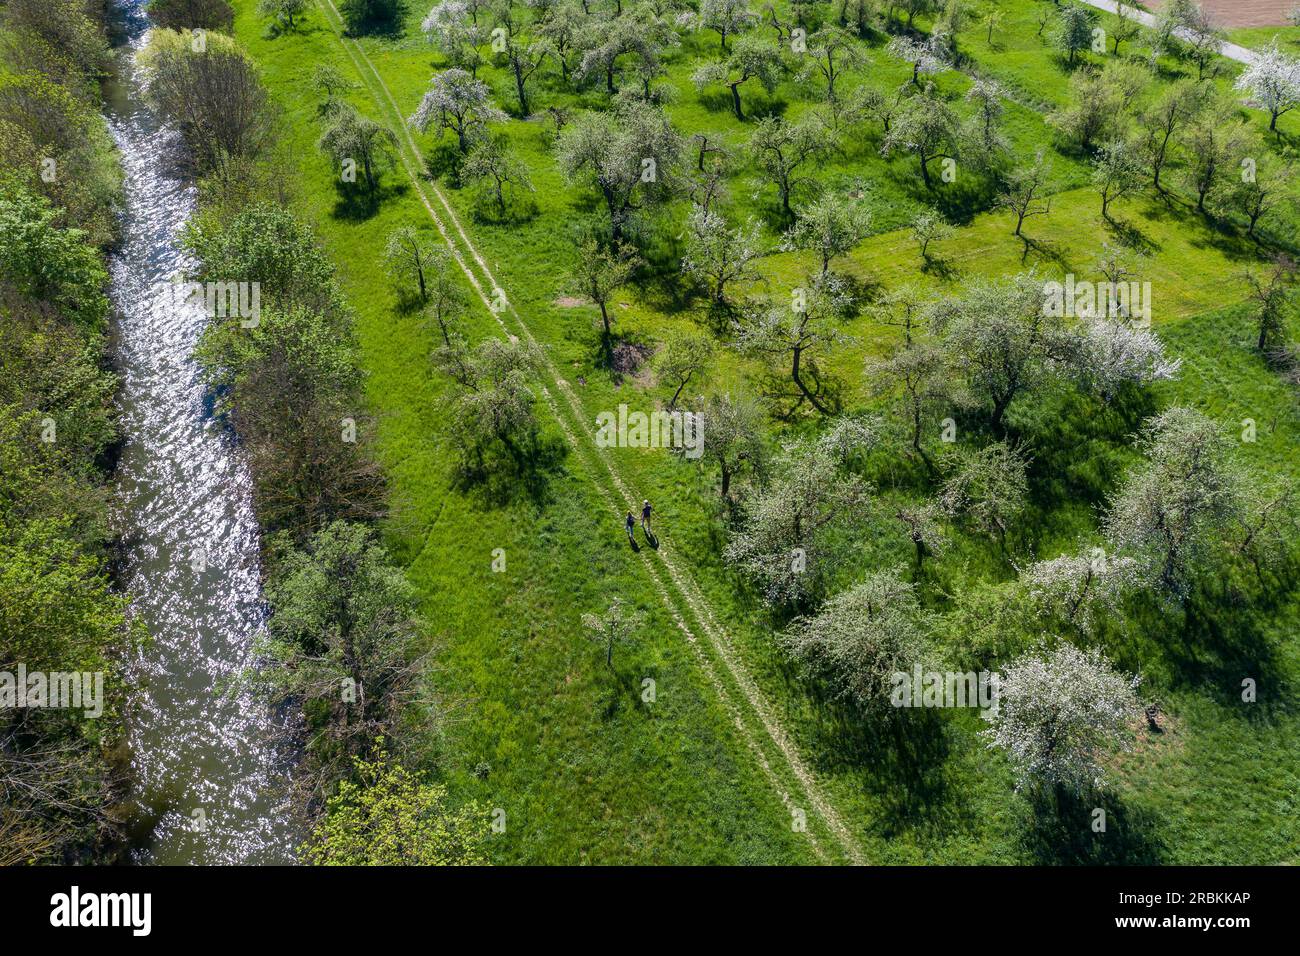 Aerial view of blossoming apple trees next to dirt road on the Tauber River, Tauberbischofsheim, Baden-Wuerttemberg, Germany, Europe Stock Photo